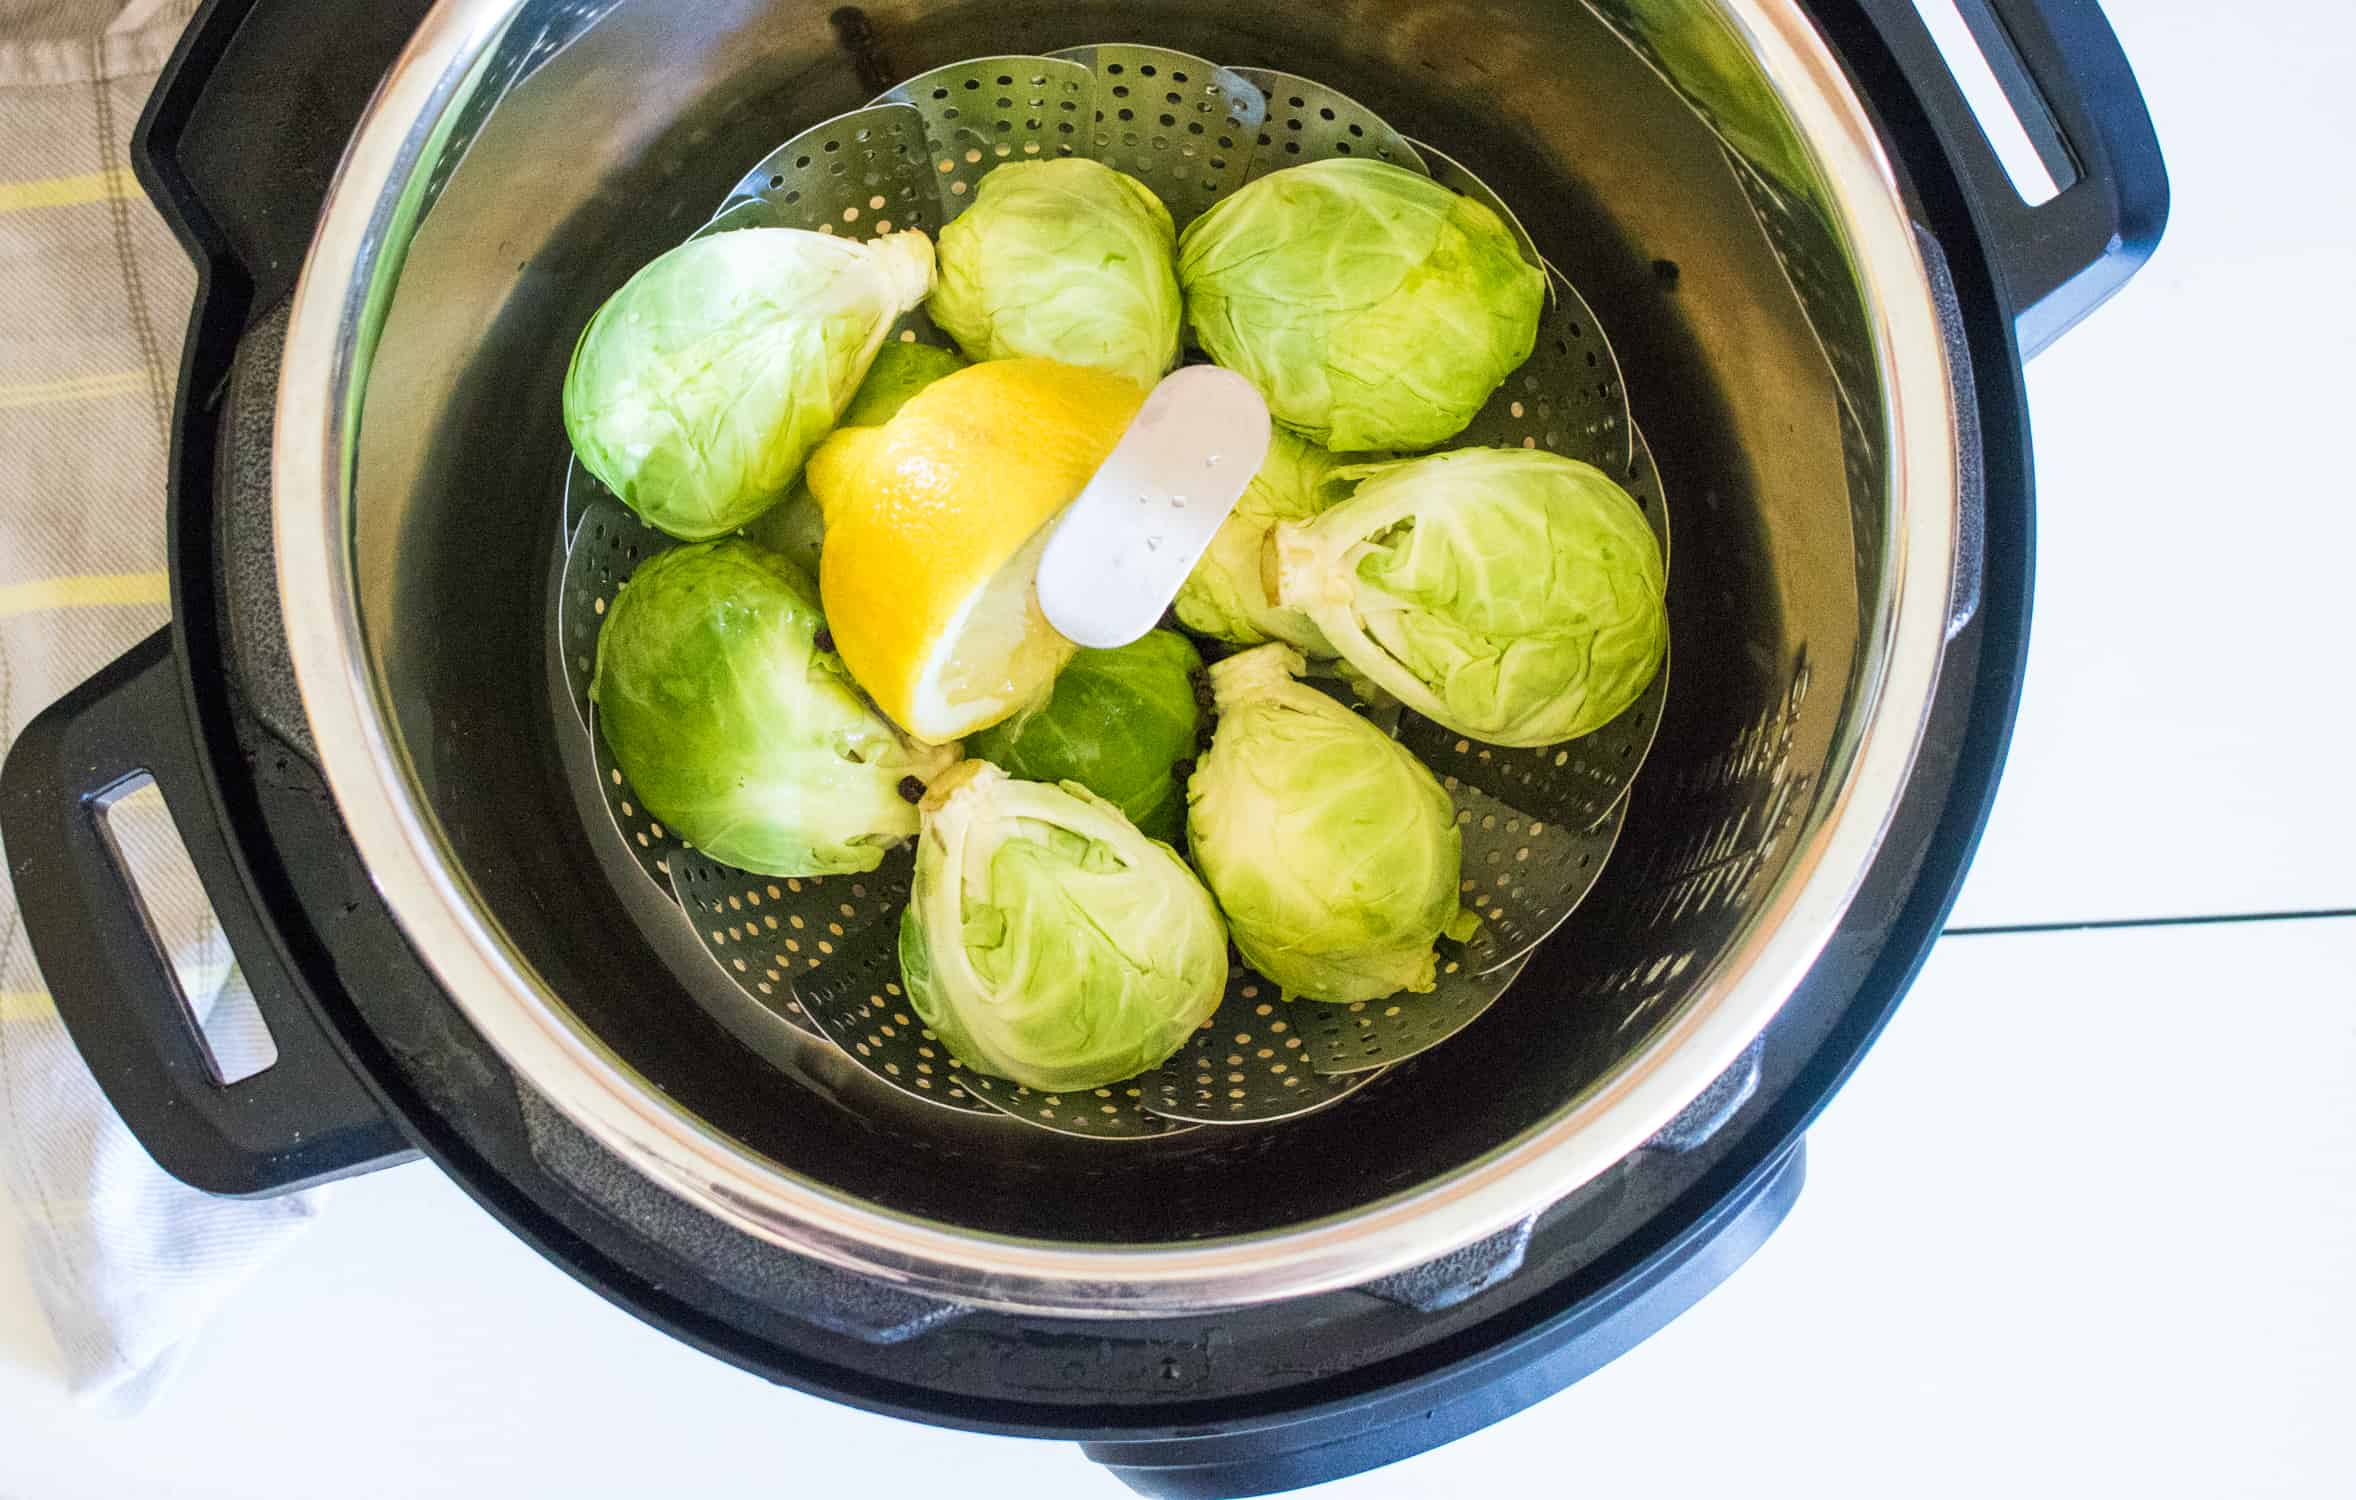 top-down view of the steamer basked filled with Brussels sprouts placed inside the Instant Pot